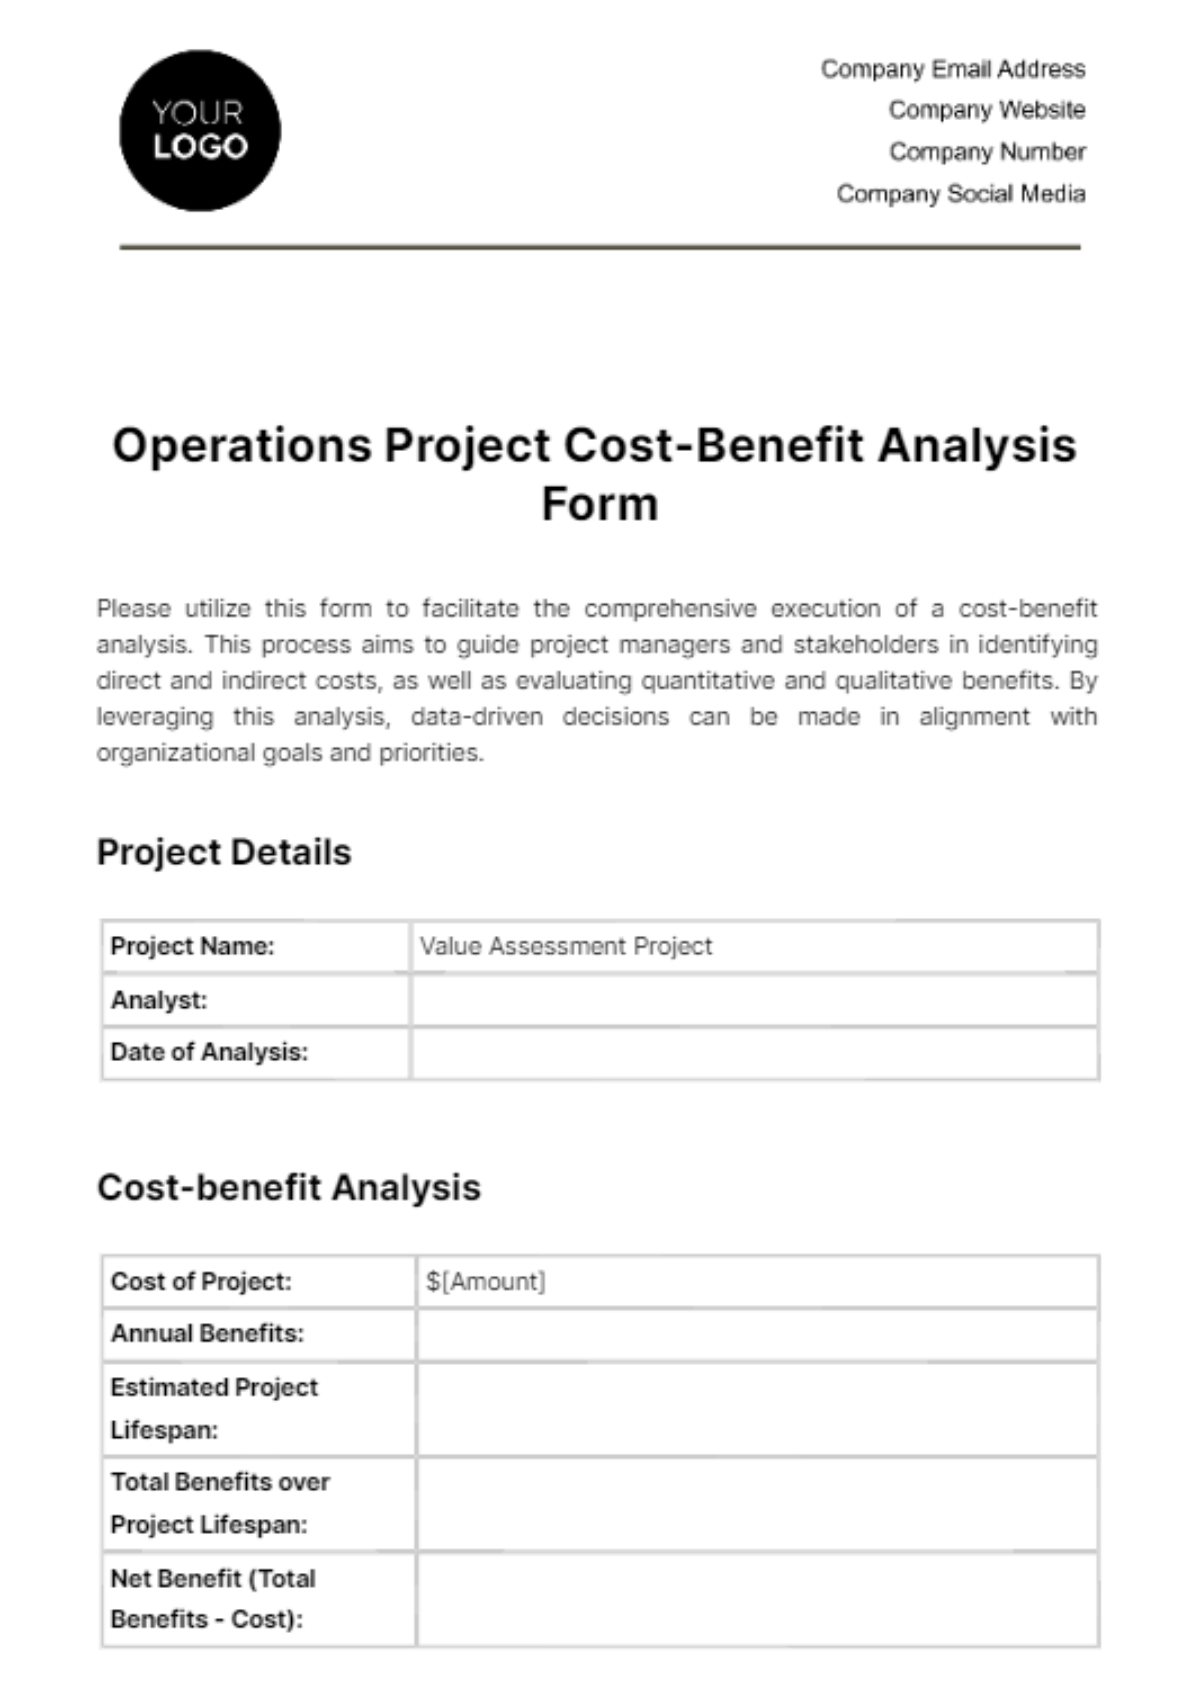 Operations Project Cost-Benefit Analysis Form Template